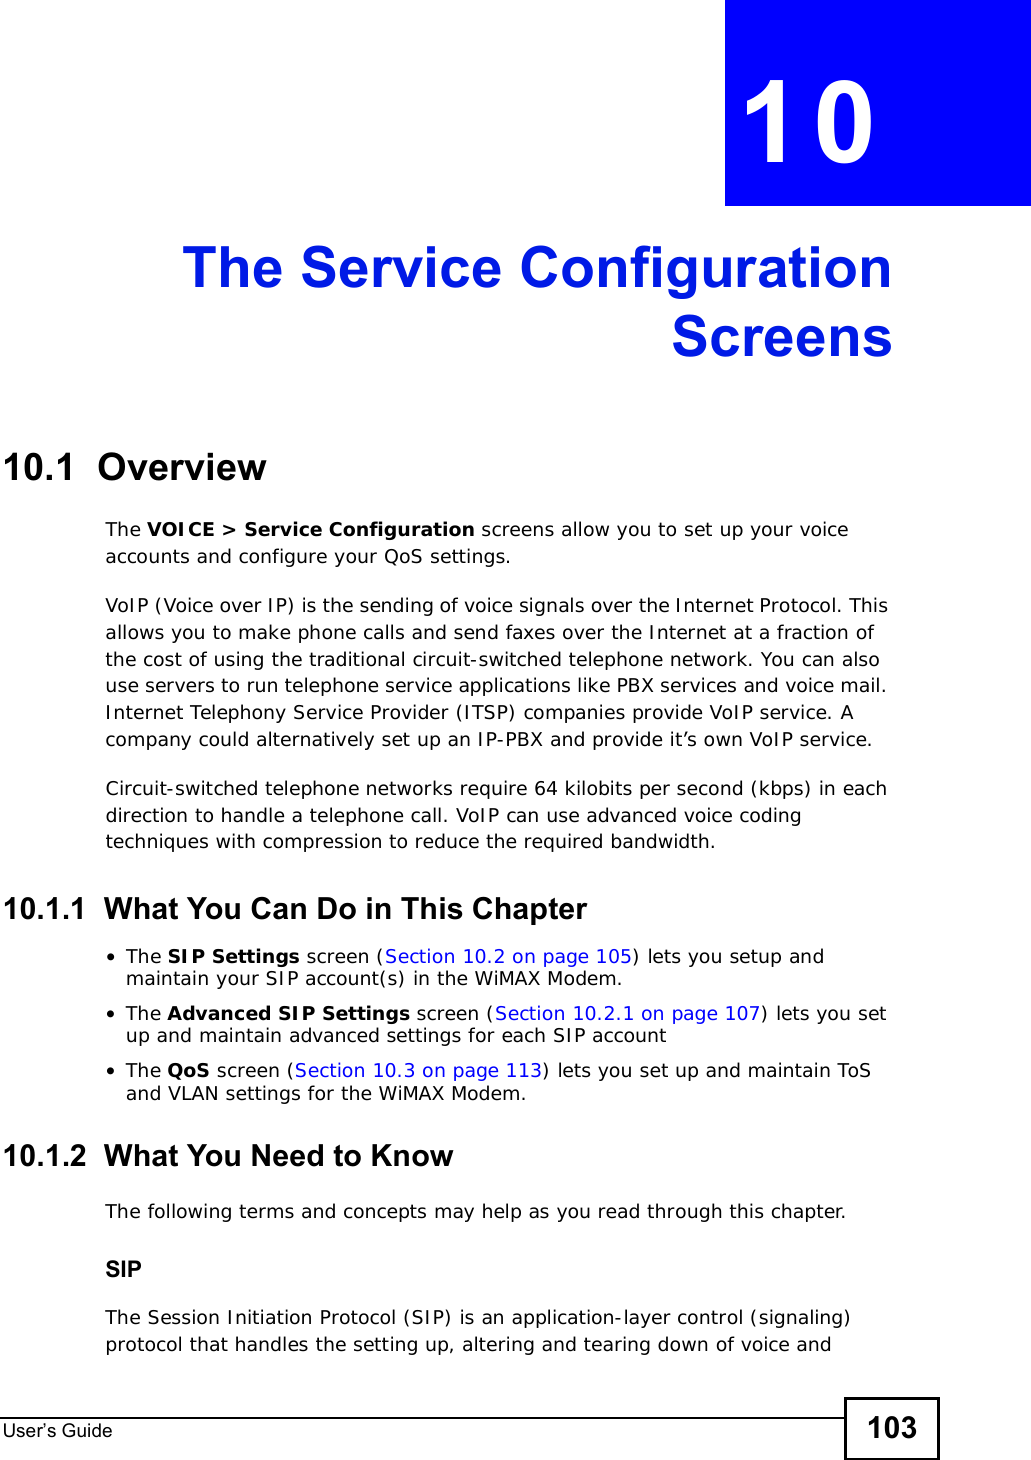 User s Guide 103CHAPTER 10The Service ConfigurationScreens10.1  OverviewThe VOICE &gt; Service Configuration screens allow you to set up your voice accounts and configure your QoS settings.VoIP (Voice over IP) is the sending of voice signals over the Internet Protocol. This allows you to make phone calls and send faxes over the Internet at a fraction of the cost of using the traditional circuit-switched telephone network. You can also use servers to run telephone service applications like PBX services and voice mail. Internet Telephony Service Provider (ITSP) companies provide VoIP service. A company could alternatively set up an IP-PBX and provide it’s own VoIP service.Circuit-switched telephone networks require 64 kilobits per second (kbps) in each direction to handle a telephone call. VoIP can use advanced voice coding techniques with compression to reduce the required bandwidth.10.1.1  What You Can Do in This Chapter•The SIP Settings screen (Section 10.2 on page 105) lets you setup and maintain your SIP account(s) in the WiMAX Modem.•The Advanced SIP Settings screen (Section 10.2.1 on page 107) lets you set up and maintain advanced settings for each SIP account•The QoS screen (Section 10.3 on page 113) lets you set up and maintain ToS and VLAN settings for the WiMAX Modem.10.1.2  What You Need to KnowThe following terms and concepts may help as you read through this chapter.SIPThe Session Initiation Protocol (SIP) is an application-layer control (signaling) protocol that handles the setting up, altering and tearing down of voice and 